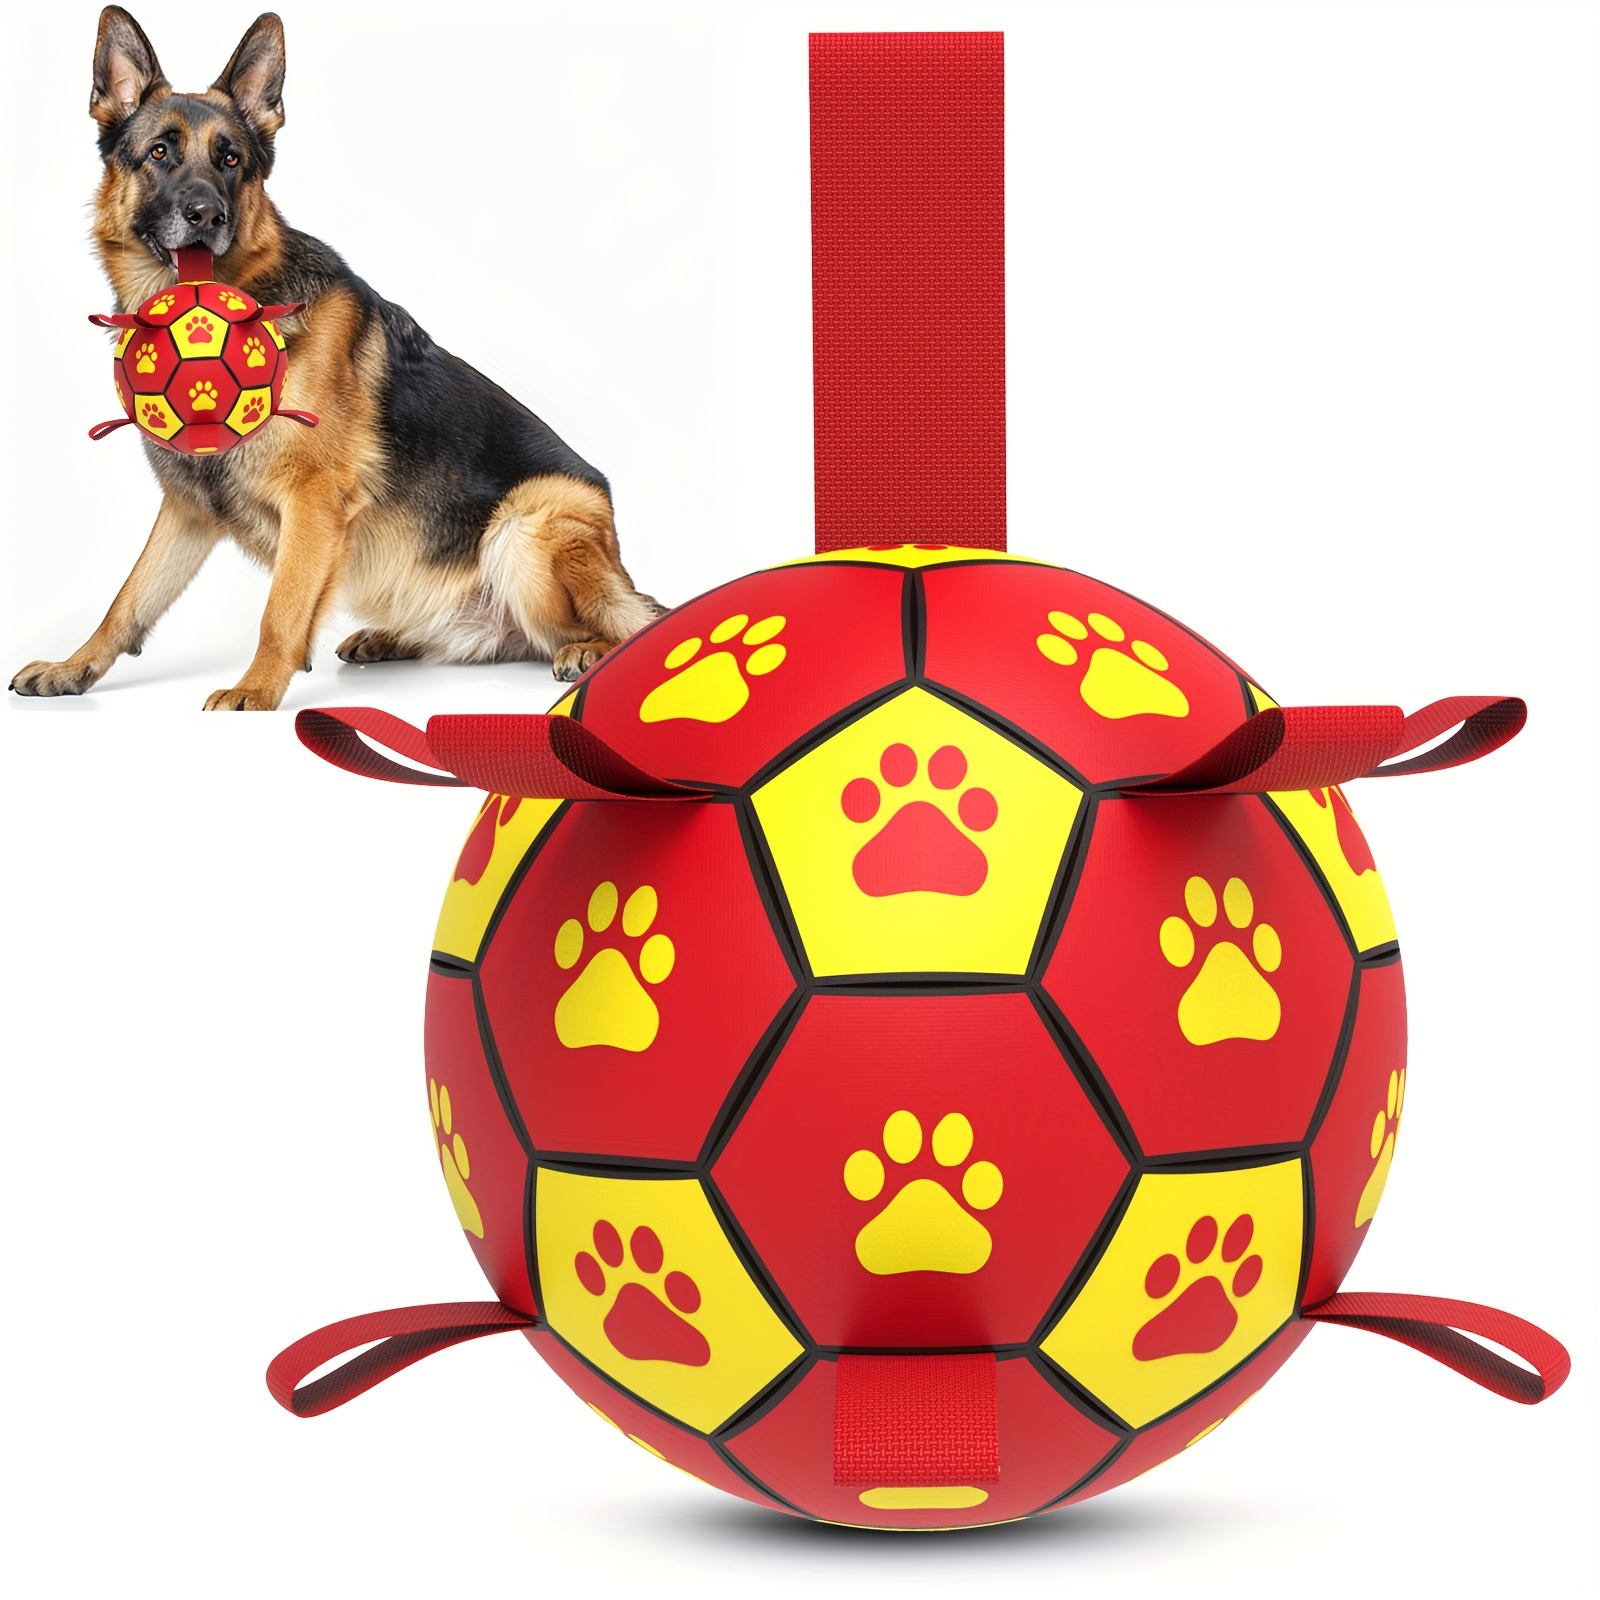 

Rucacio Dog Toy Soccer Ball With Pump, Plaid Pattern Interactive Training Rubber Football With Handle Straps For All Breed Sizes - Durable Indoor & Outdoor Play Equipment Without Battery